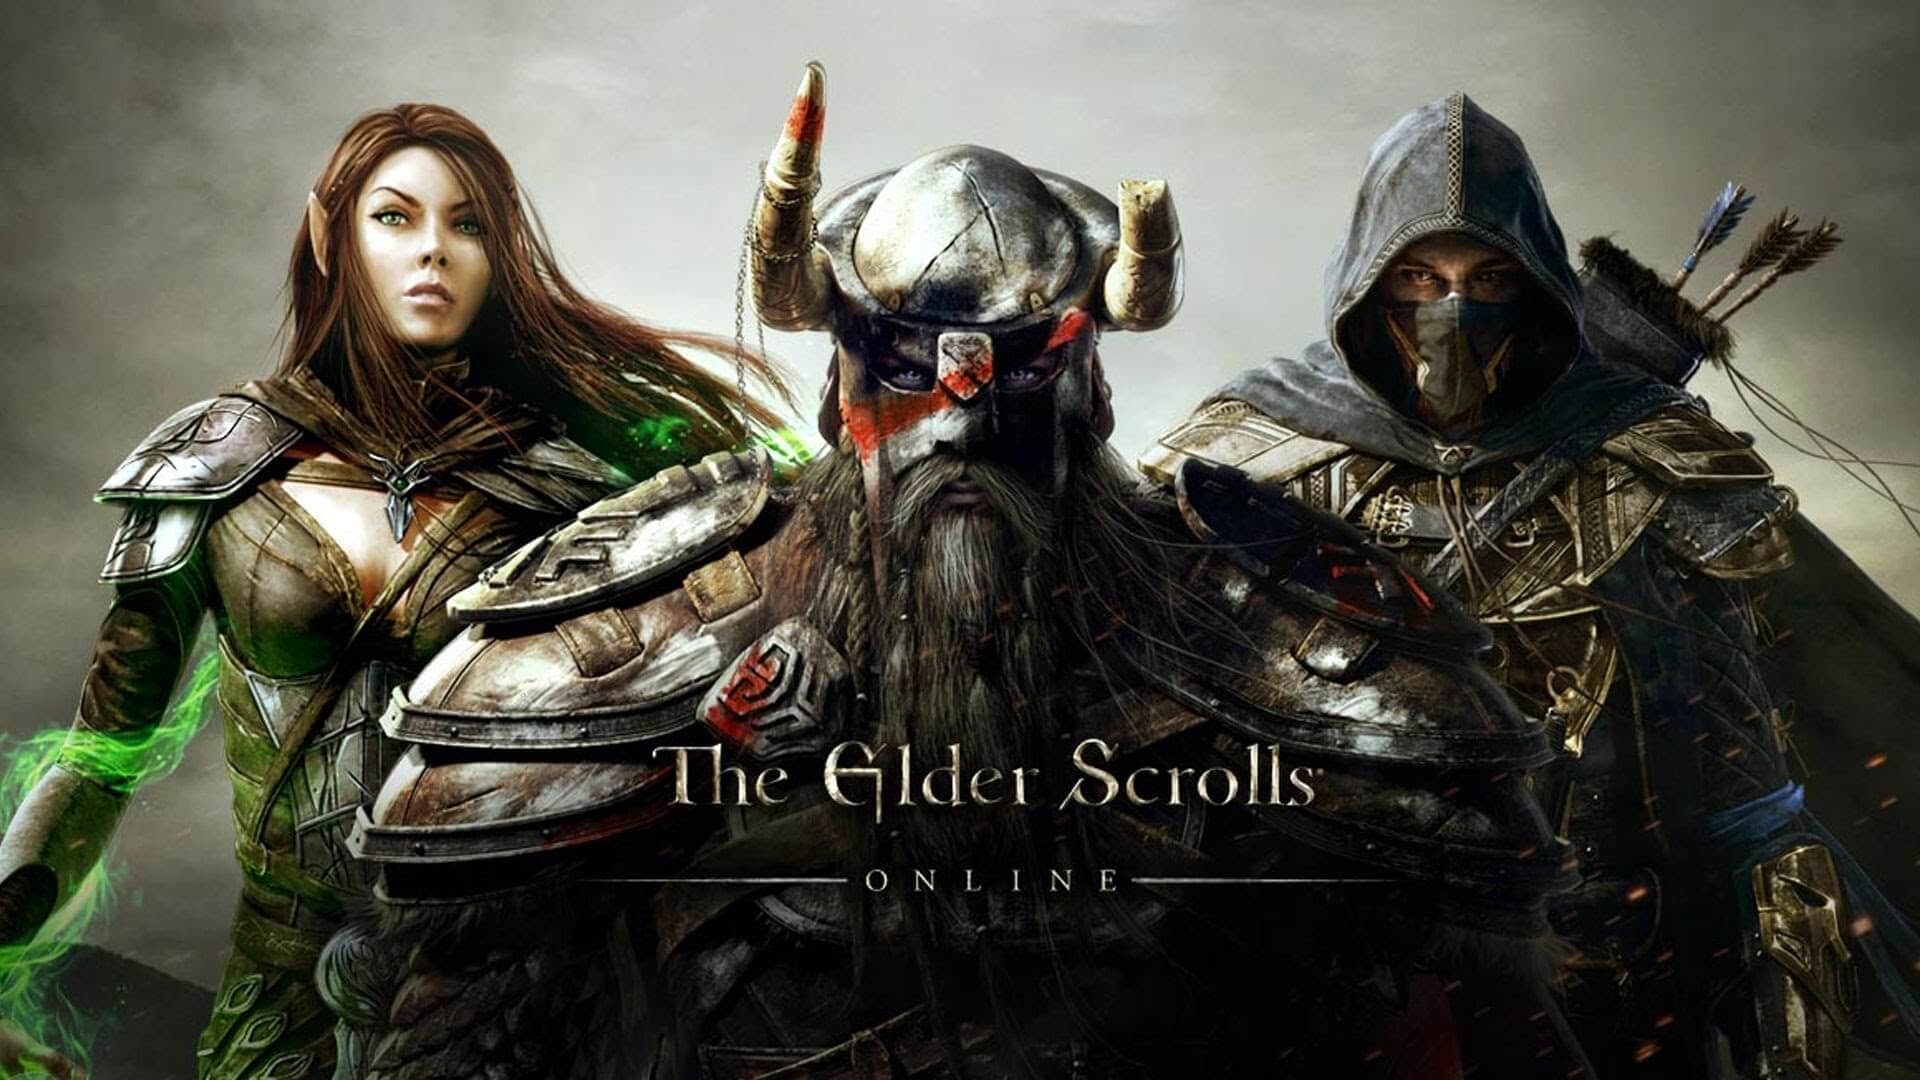 Elder Scrolls Online Free to Play for an Extended Weekend